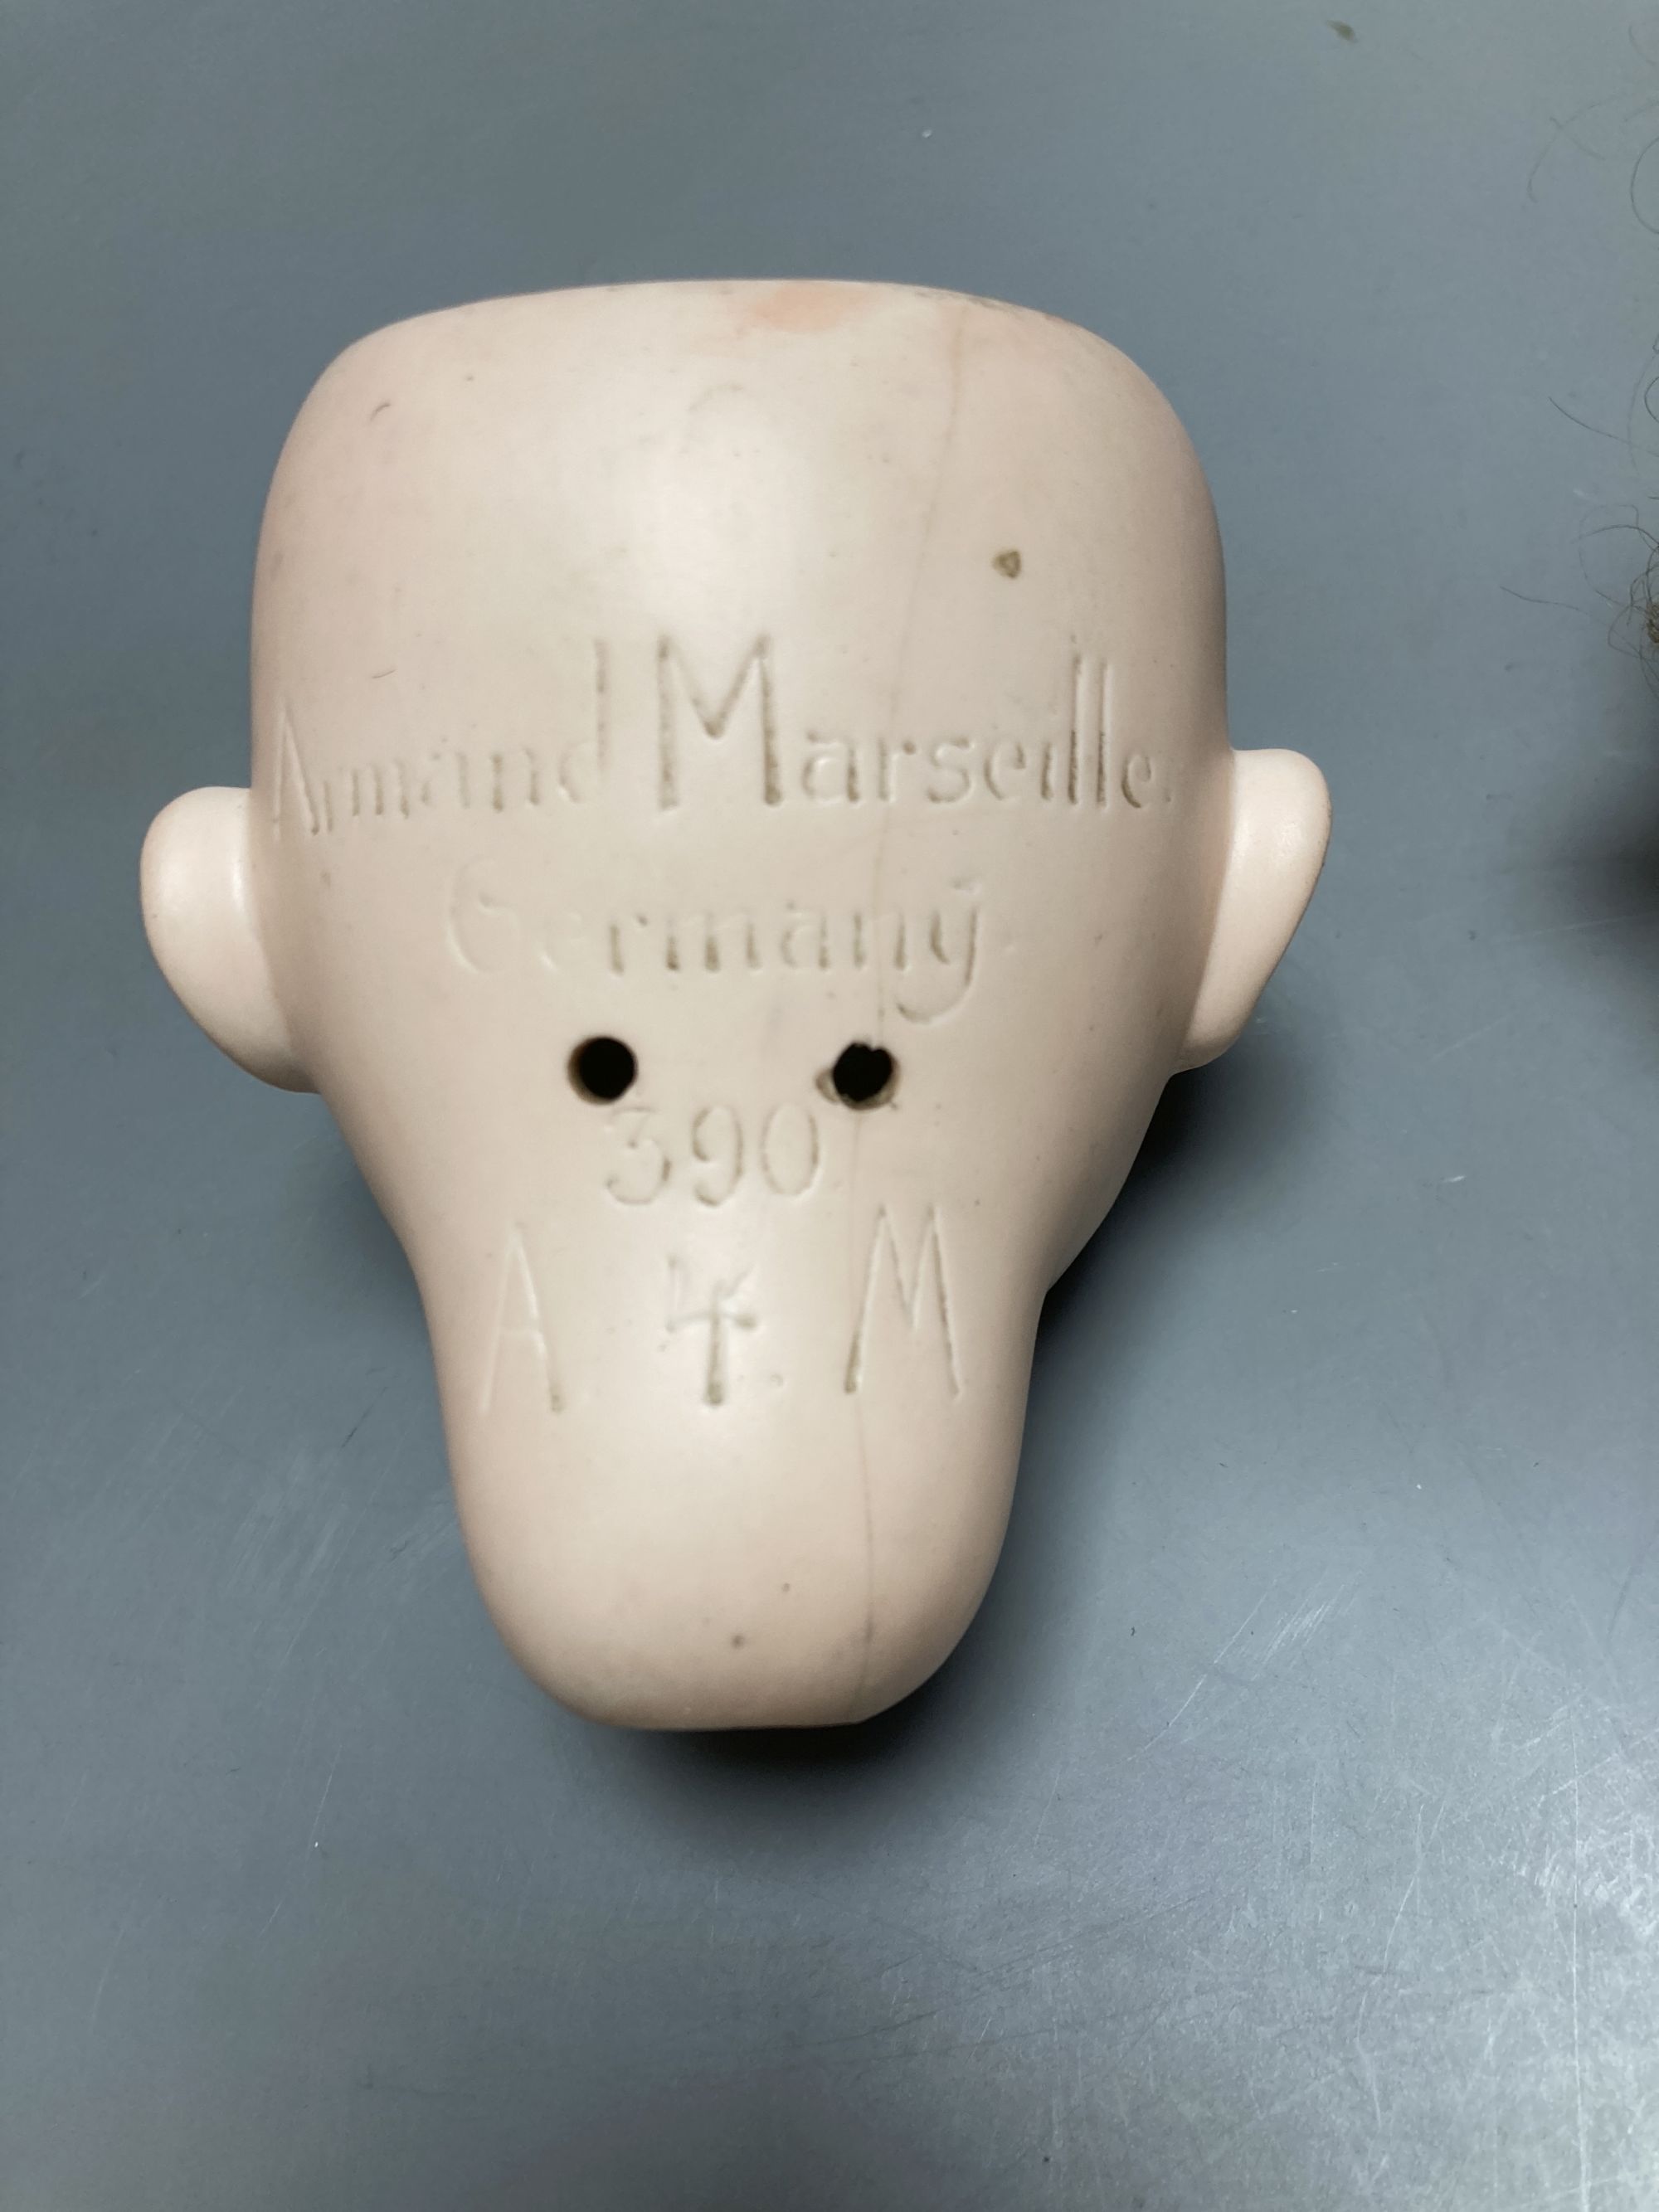 An Armand Marseille 390 bisque doll head, a Heubach Koppelsdorf bisque doll head and other